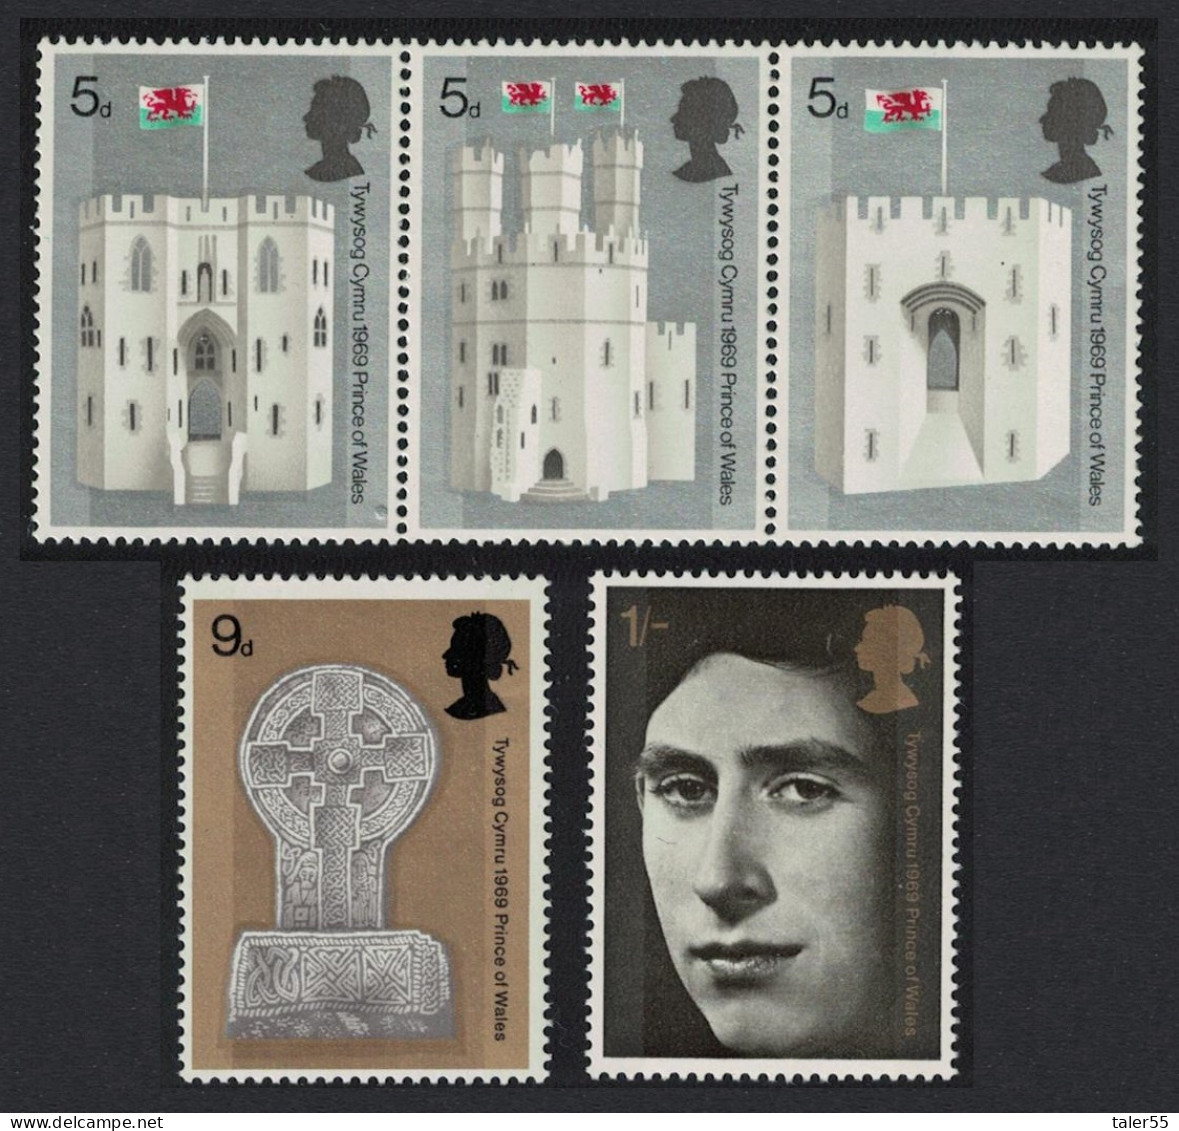 Great Britain Investiture Of The Prince Of Wales 5v 1969 MNH SG#802-806 Sc#597-599 - Neufs